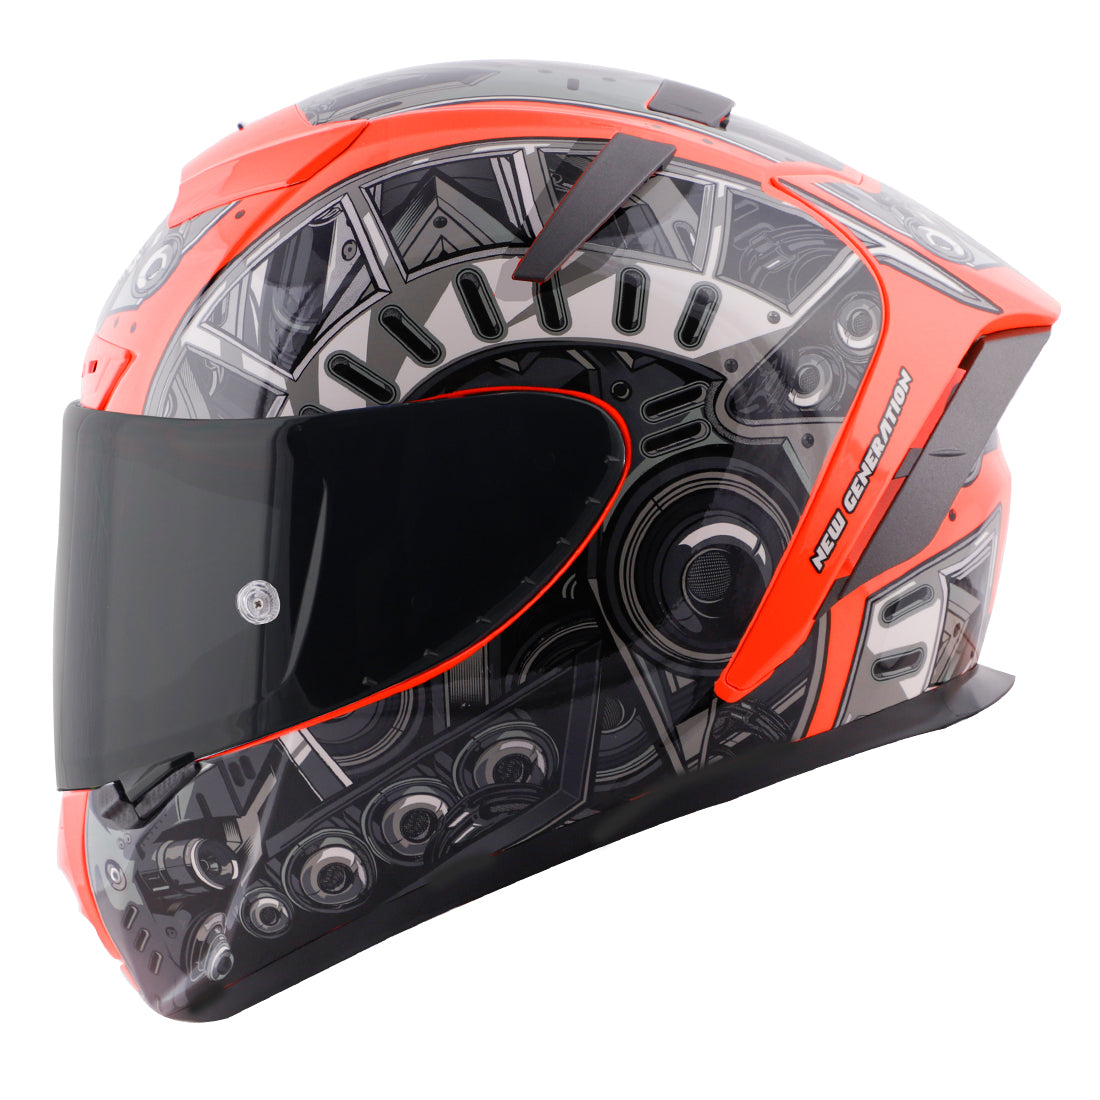 Steelbird SA-2 Terminator 2.0 ISI Certified Full Face Graphic Helmet with Smoke Visor (Glossy Fluo Red Grey)